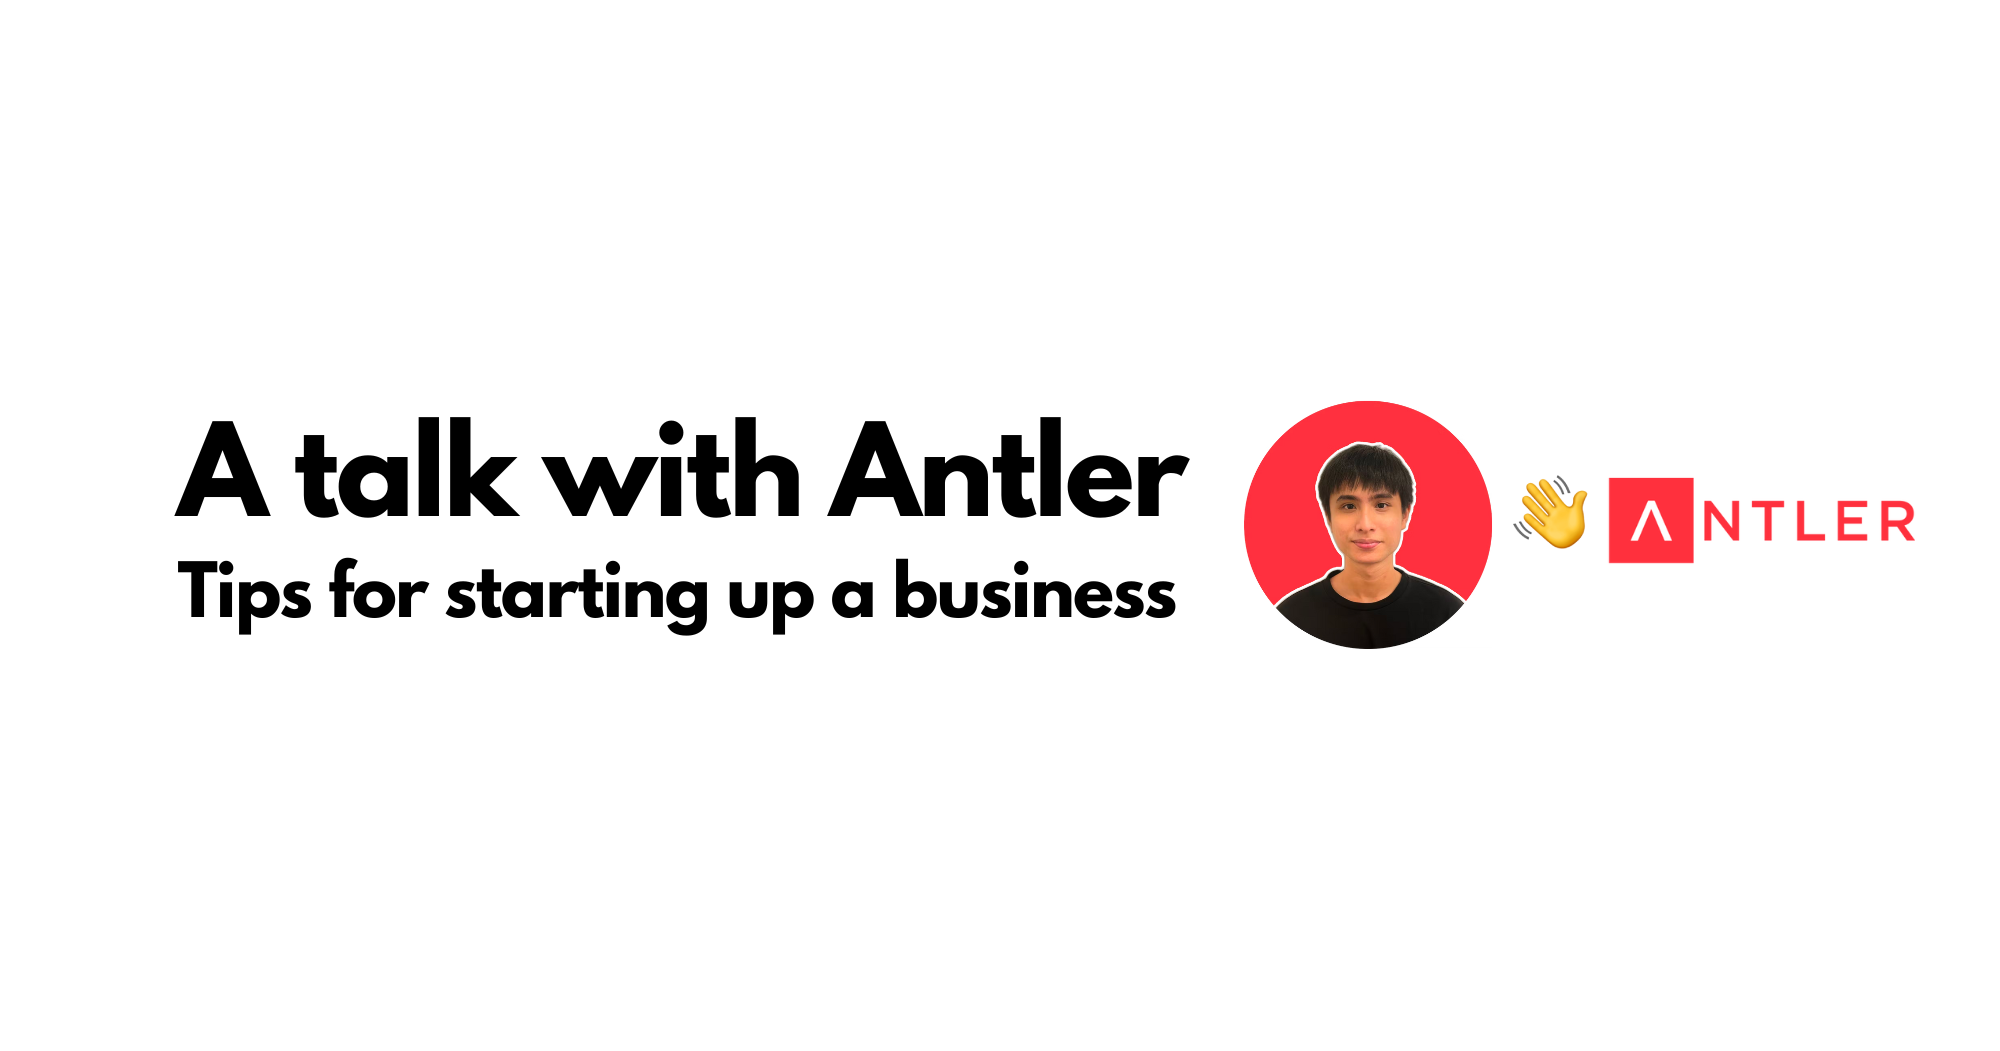 A talk with Antler: tips for starting up a business